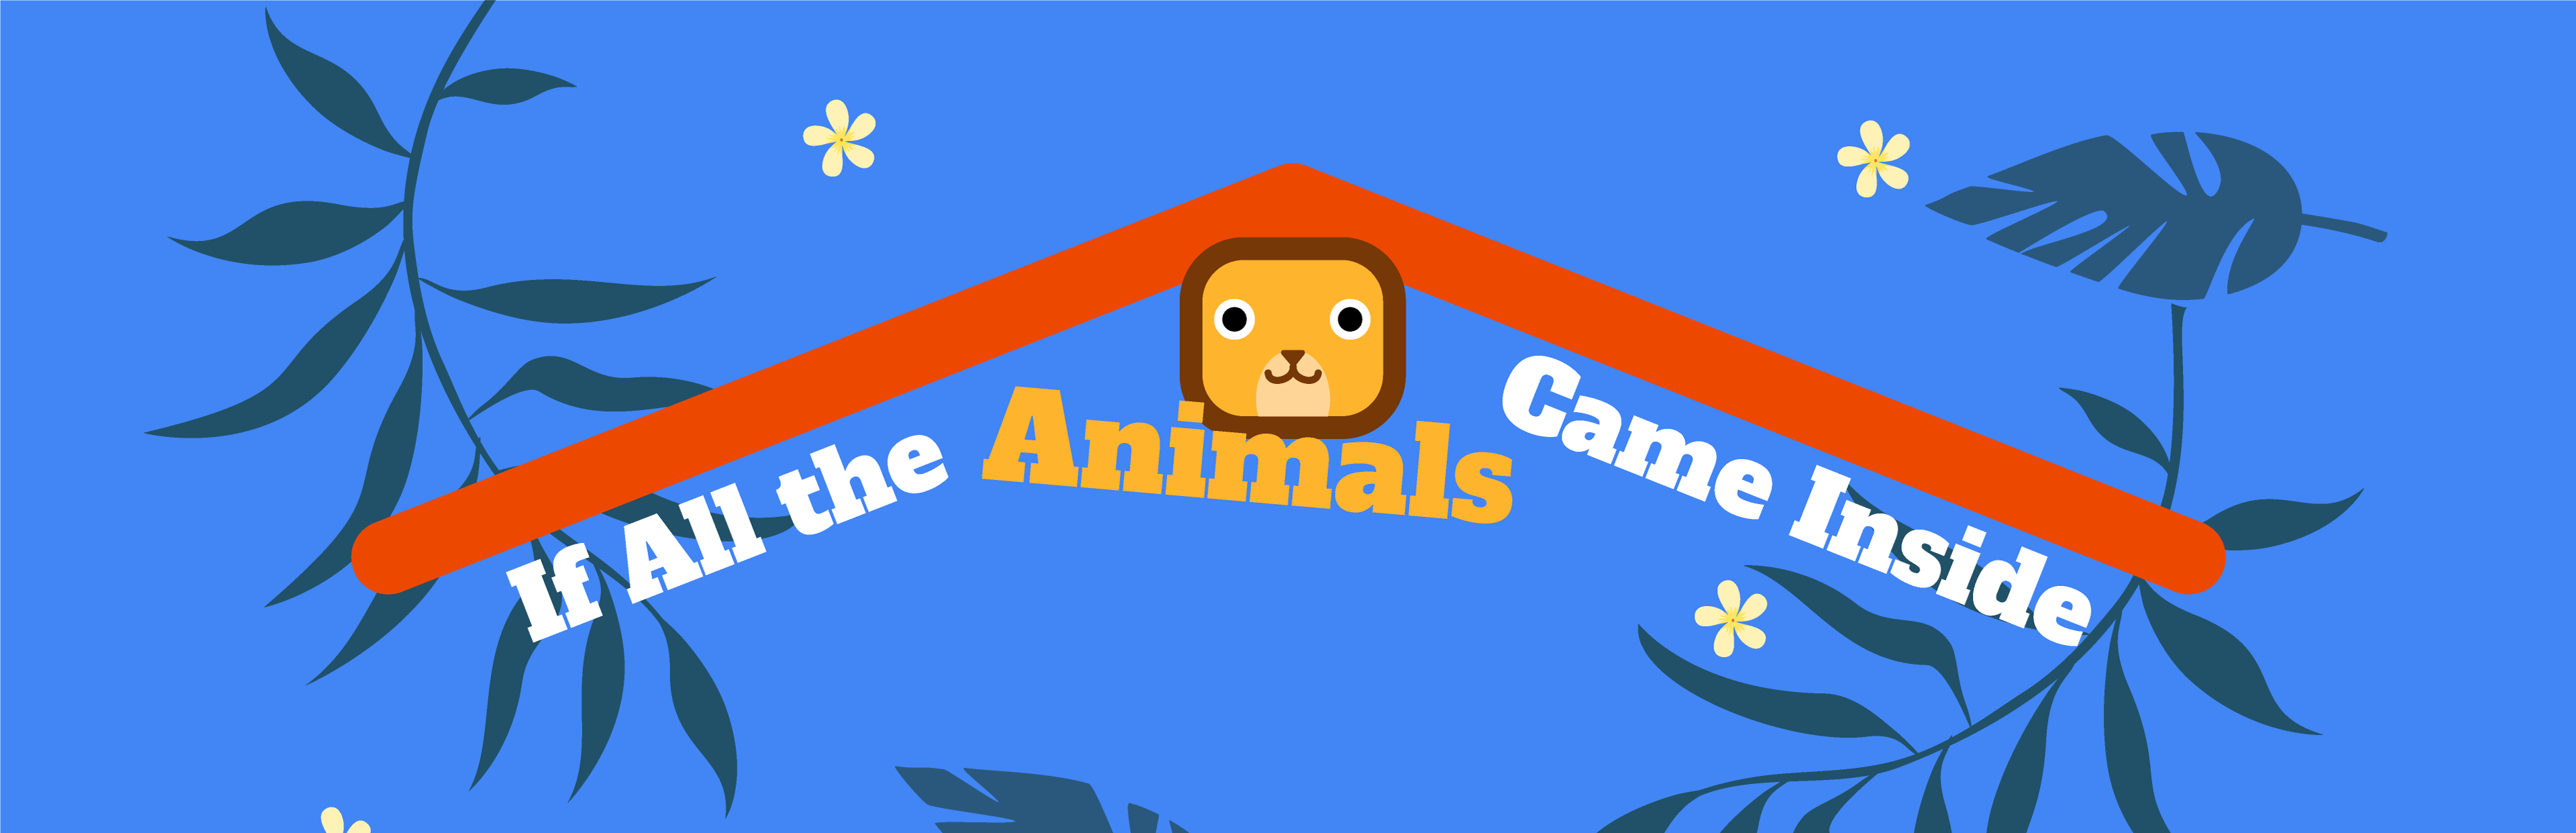 If All the Animals Came Inside